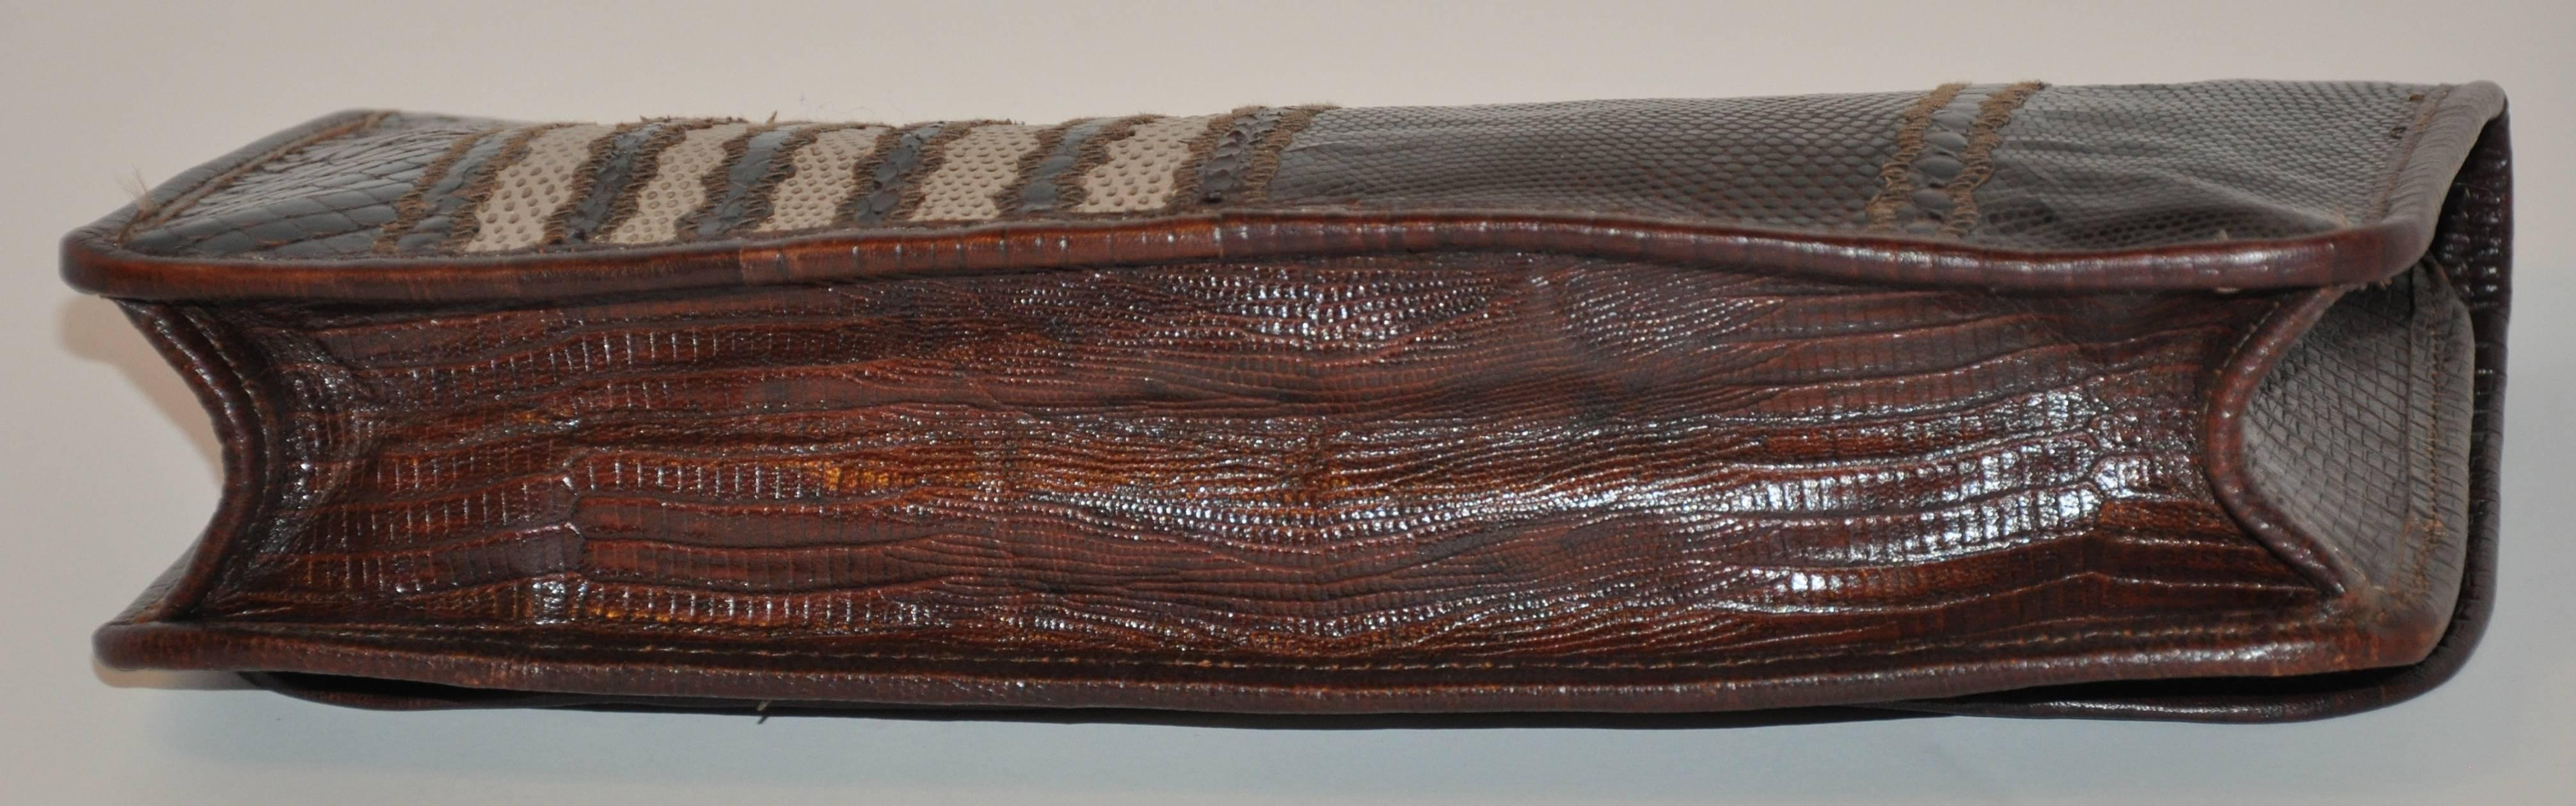 Carlos Falchi Multi-Textured Exotic Skins Coco Brown Clutch In Good Condition For Sale In New York, NY